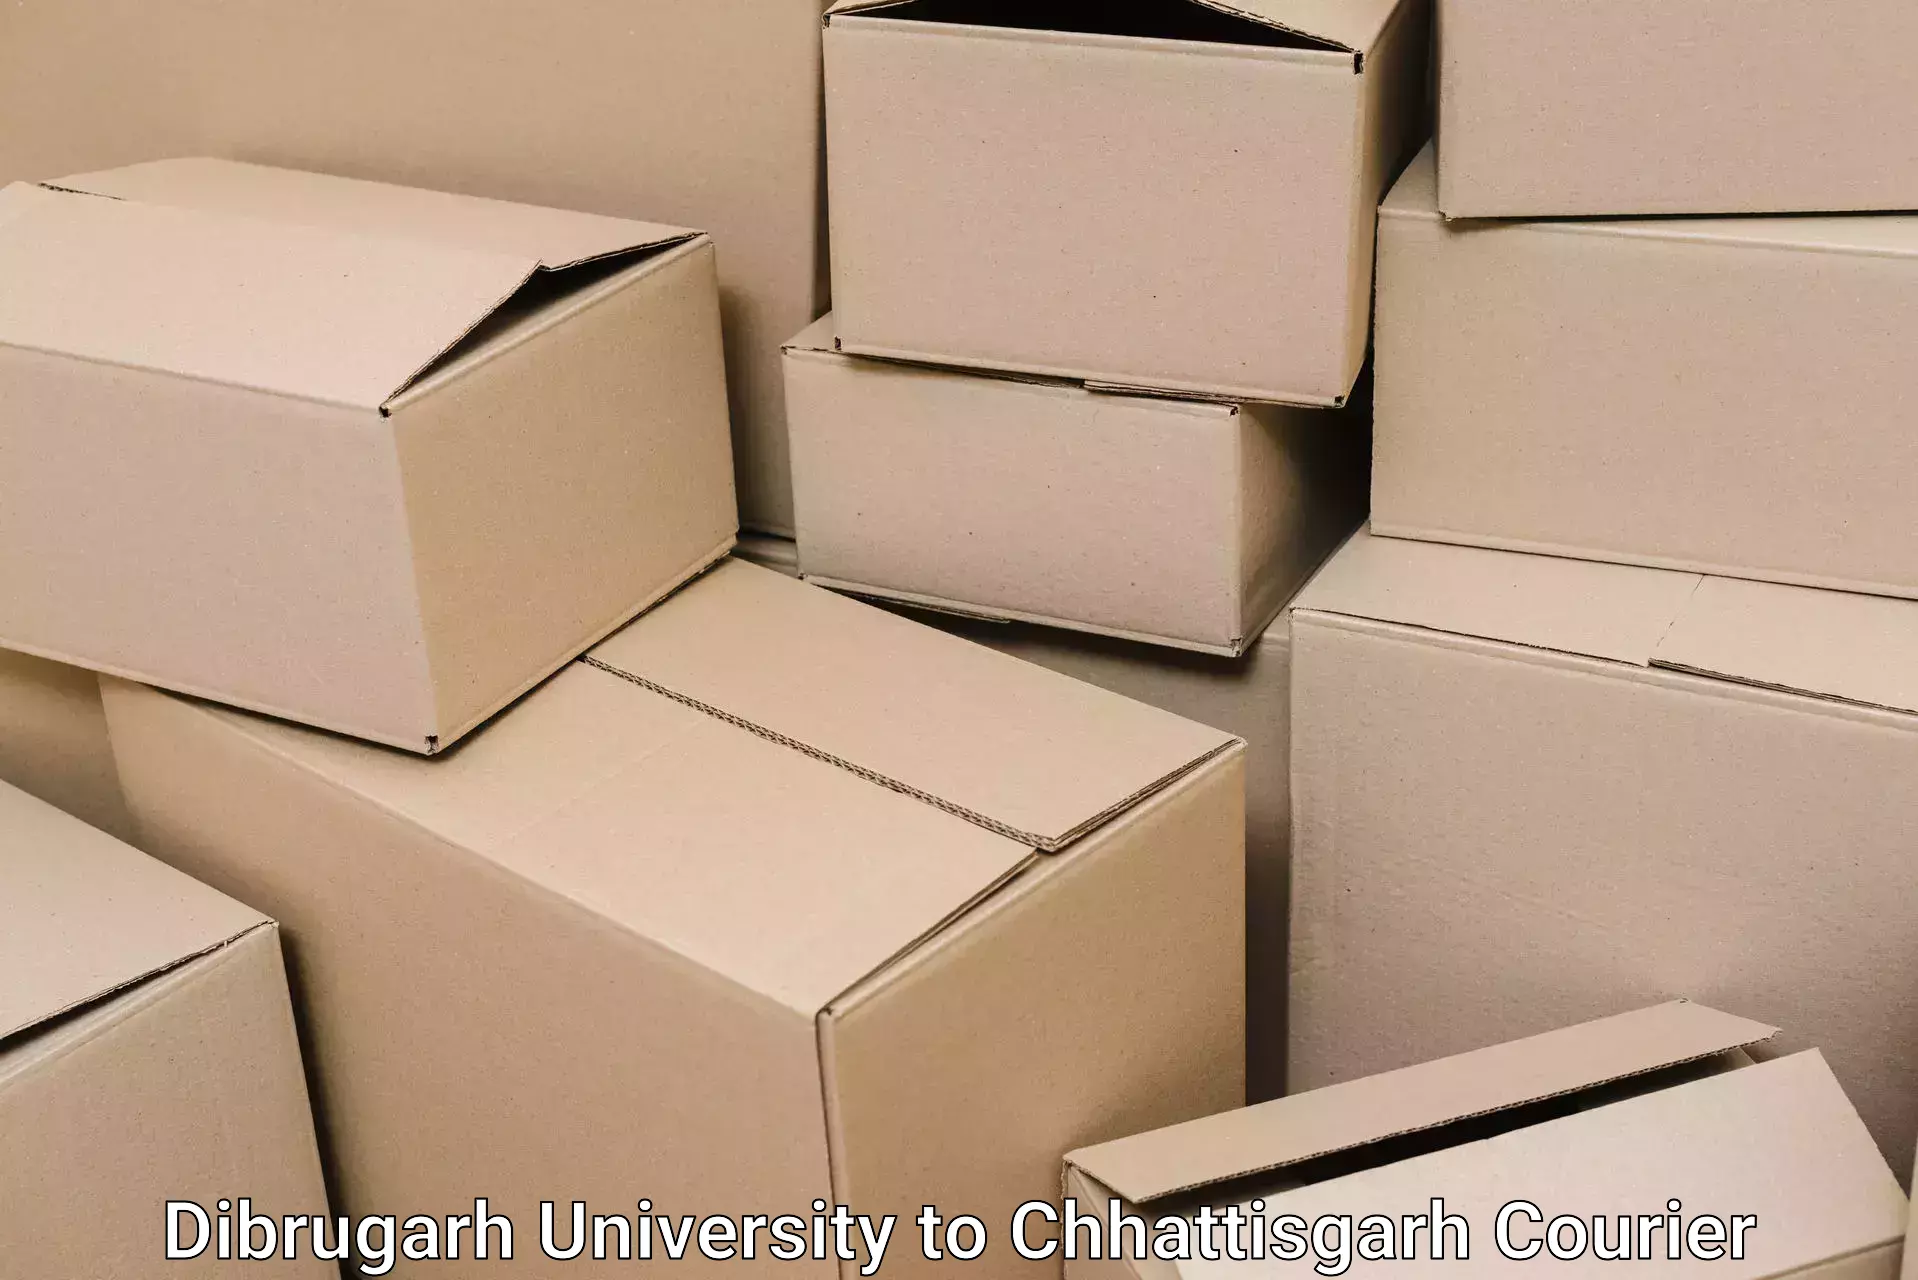 Stress-free household moving Dibrugarh University to Gariaband